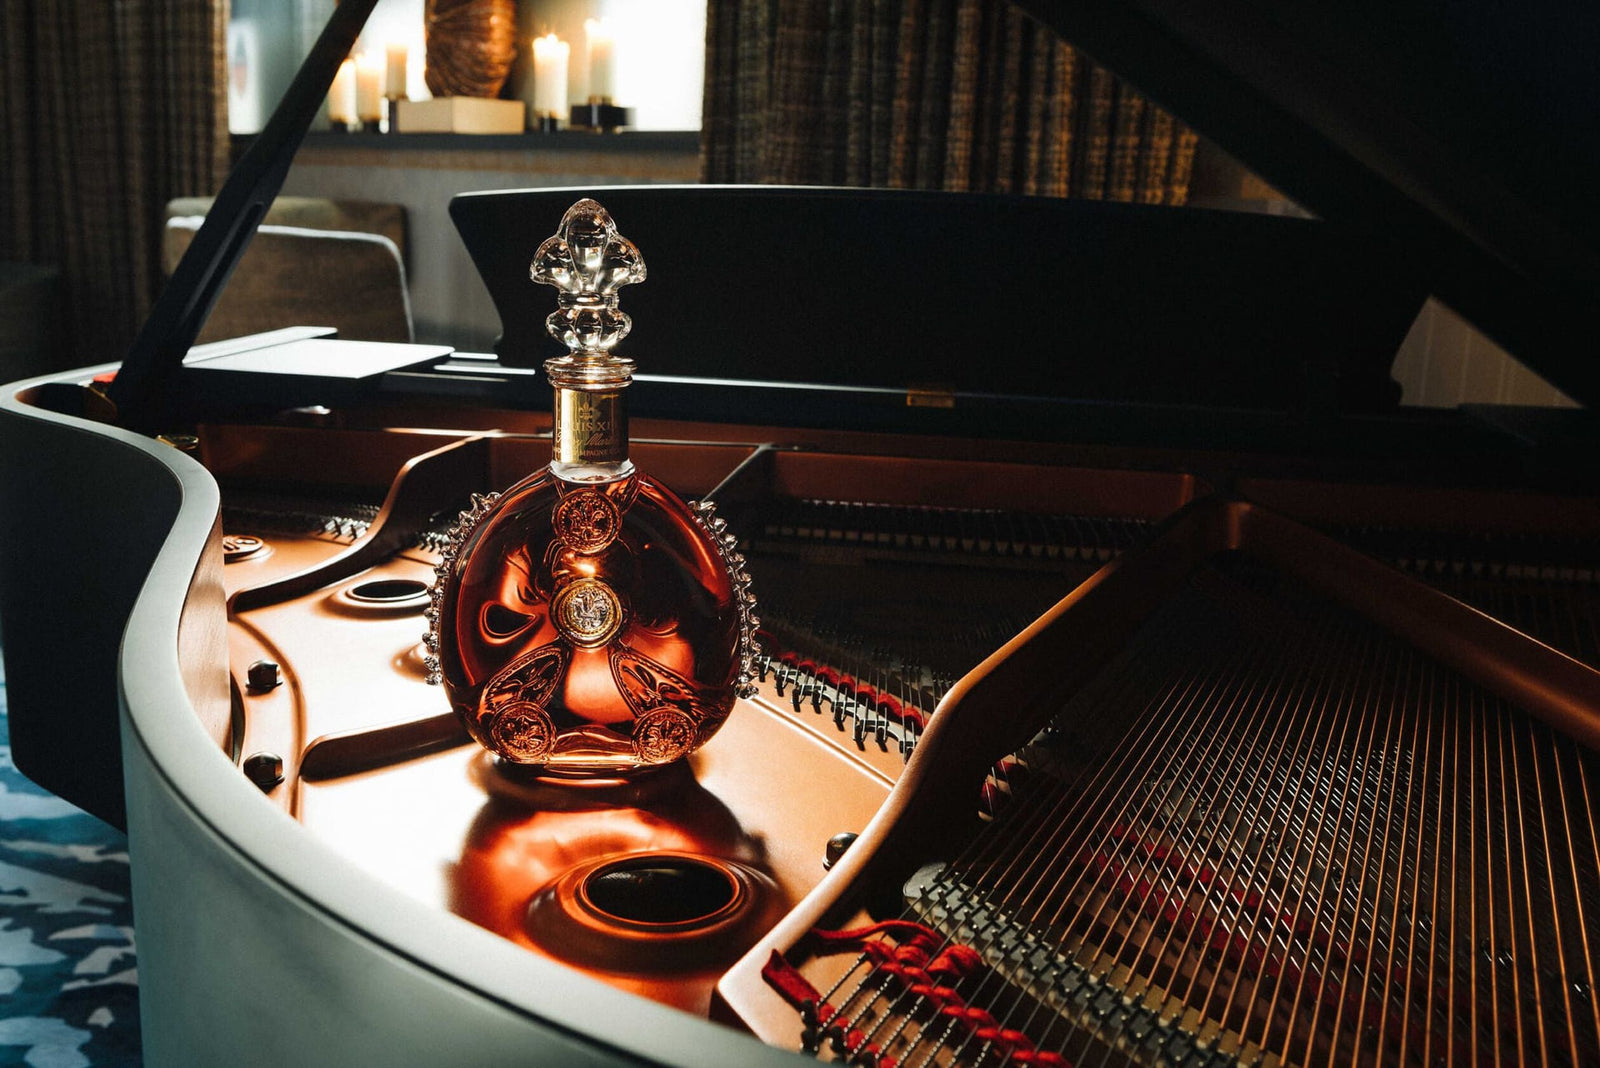 A lifestyle photo of LOUIS XIII decanter standing inside a piano